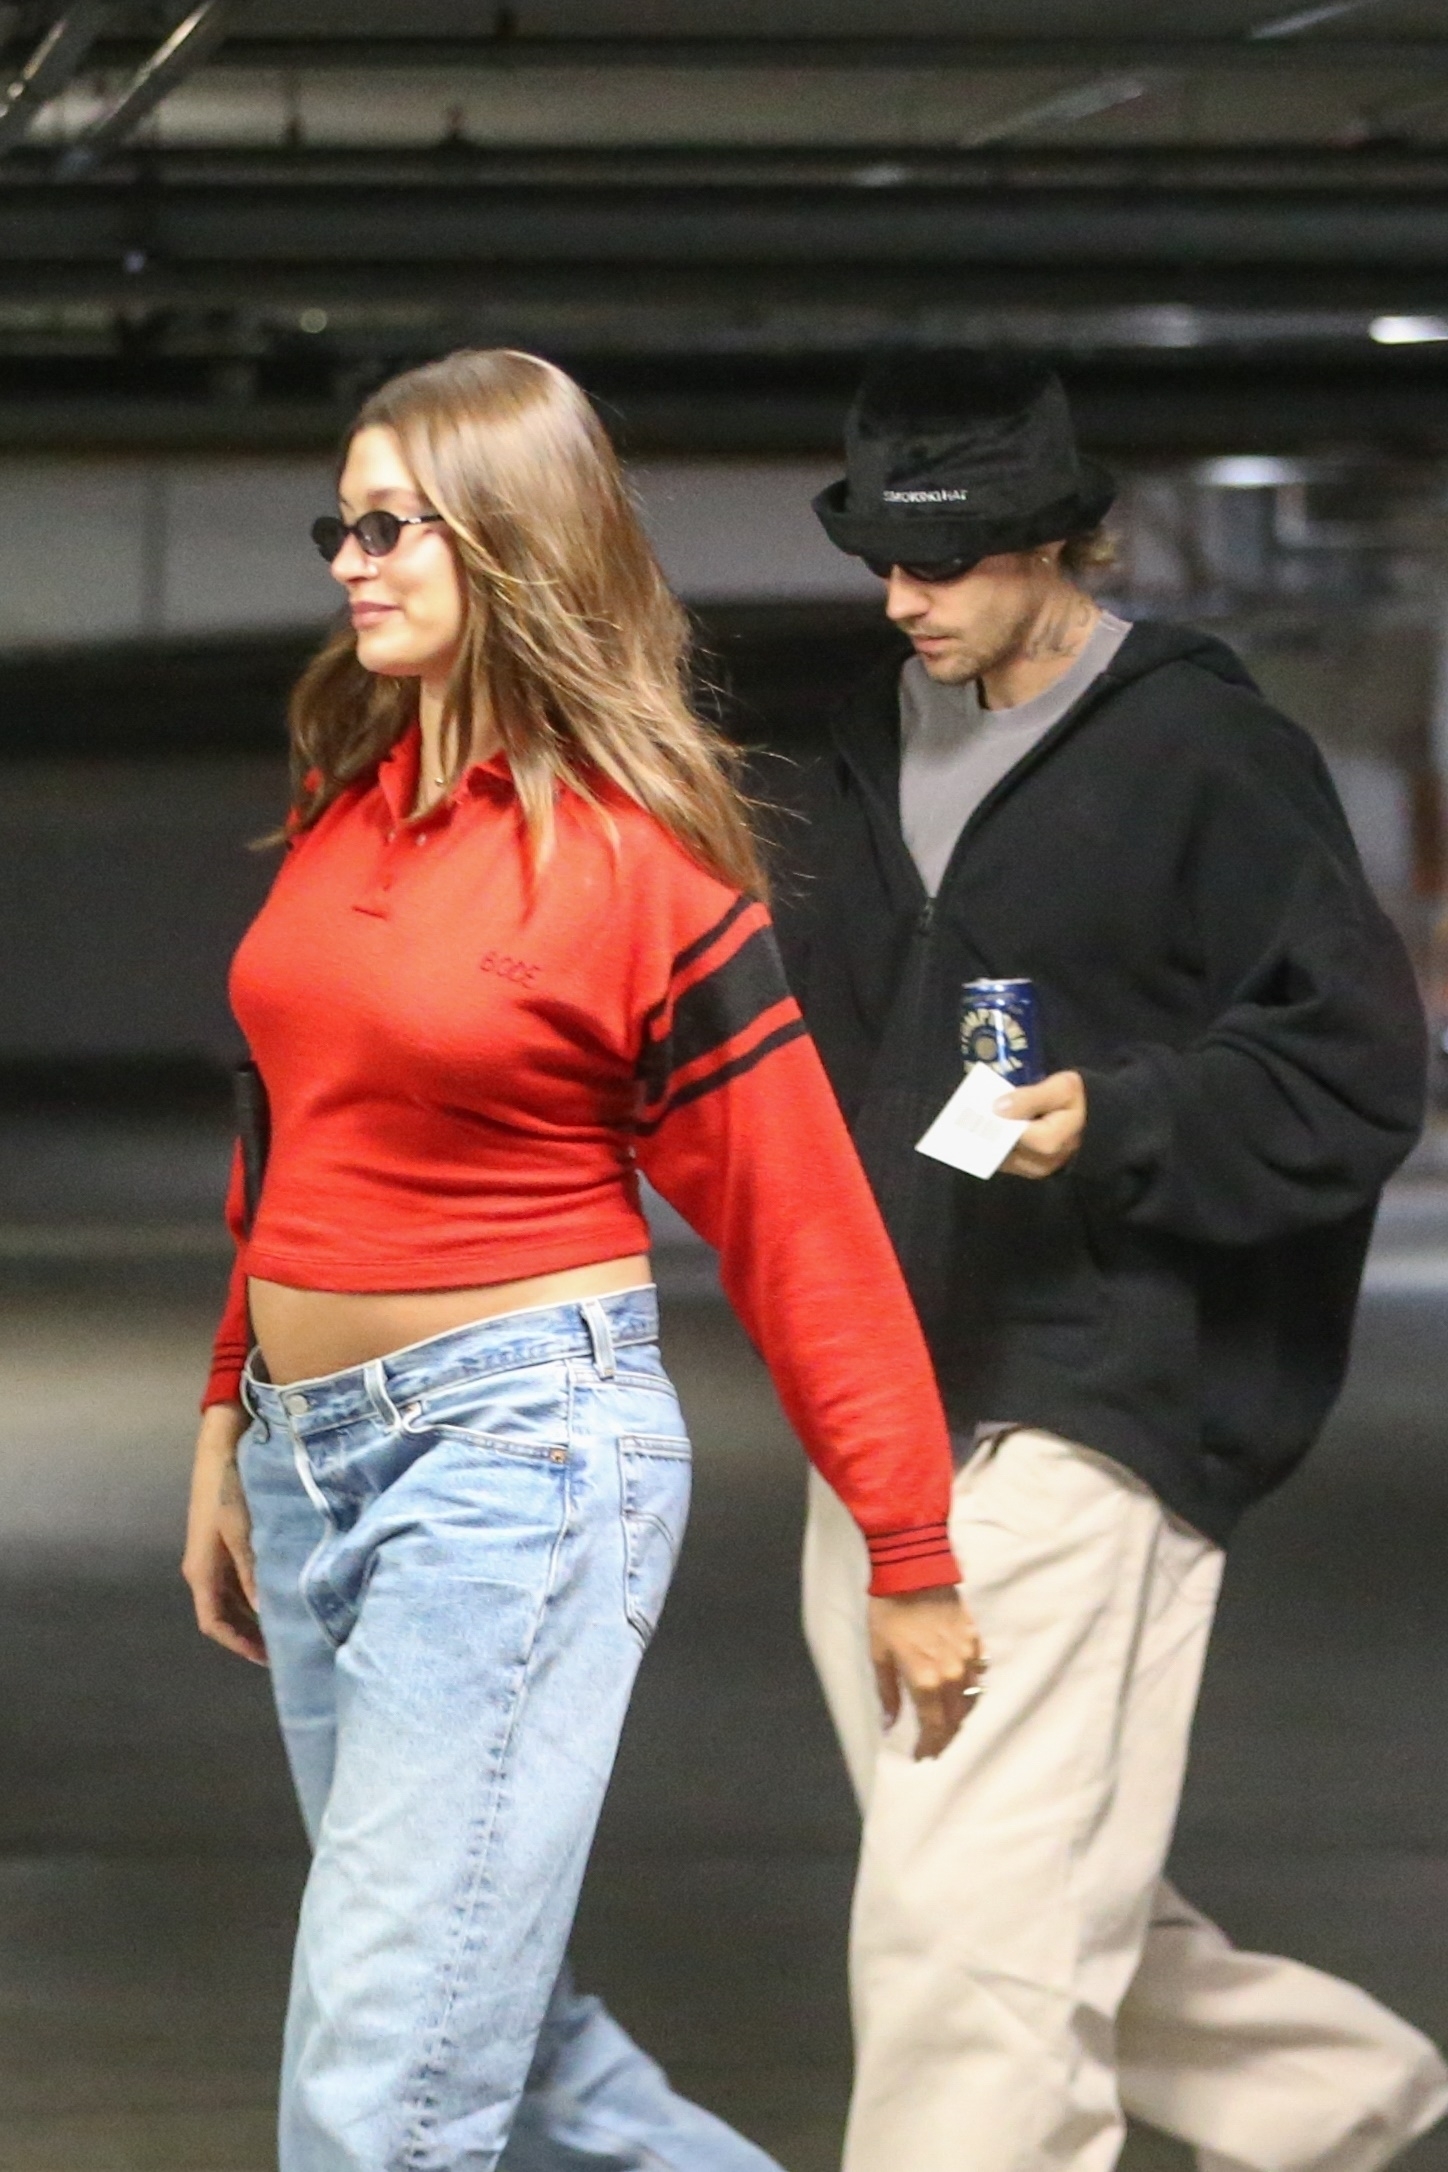 Hailey flashed her baby bump while wearing a red crop top with black stripes on the sleeves